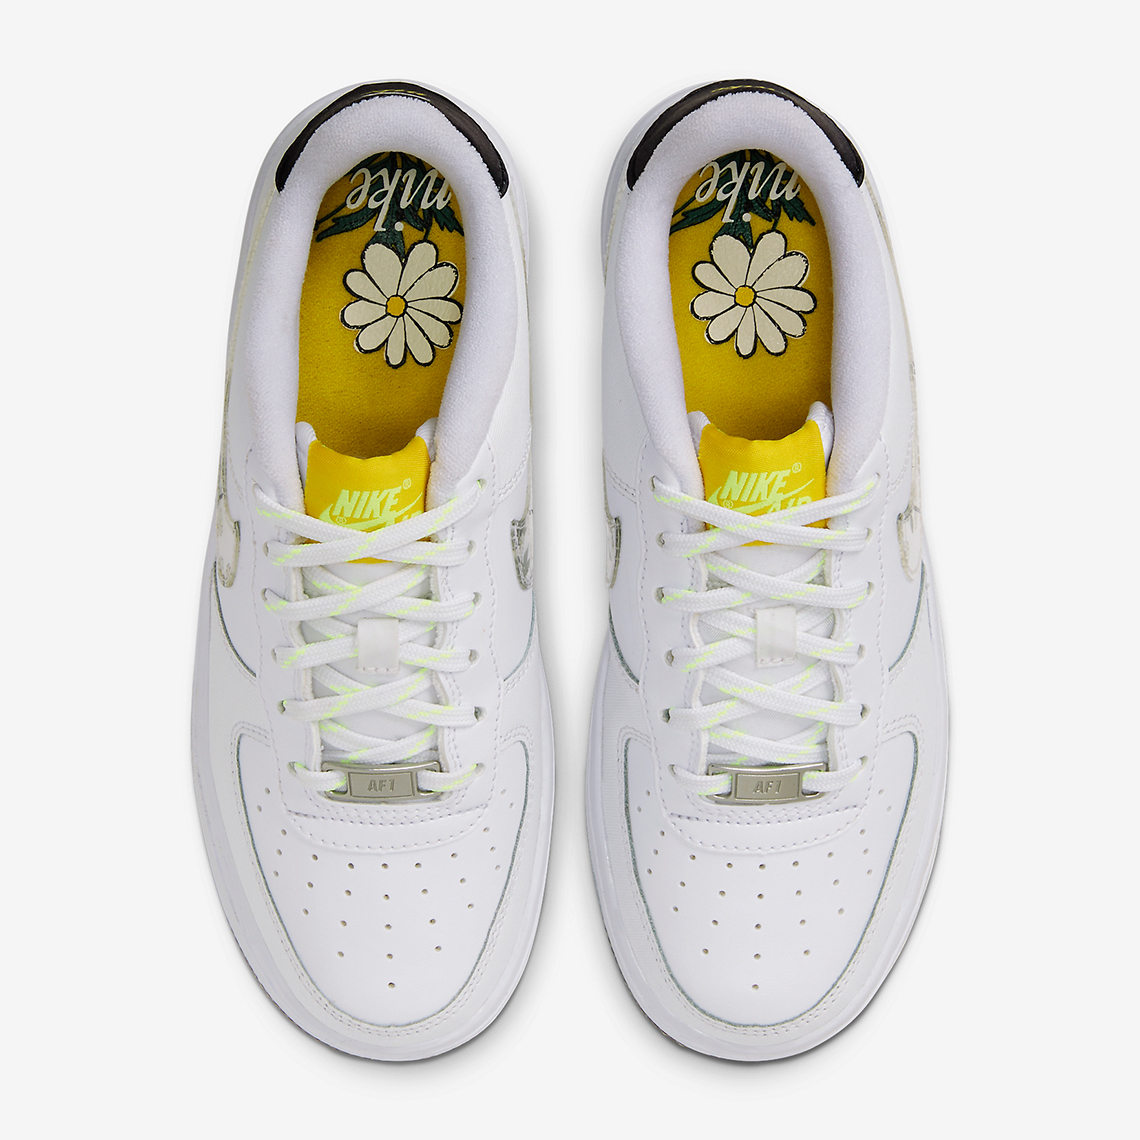 Nike Air Force 1 Low Daisy Gs Cw5859 100 4